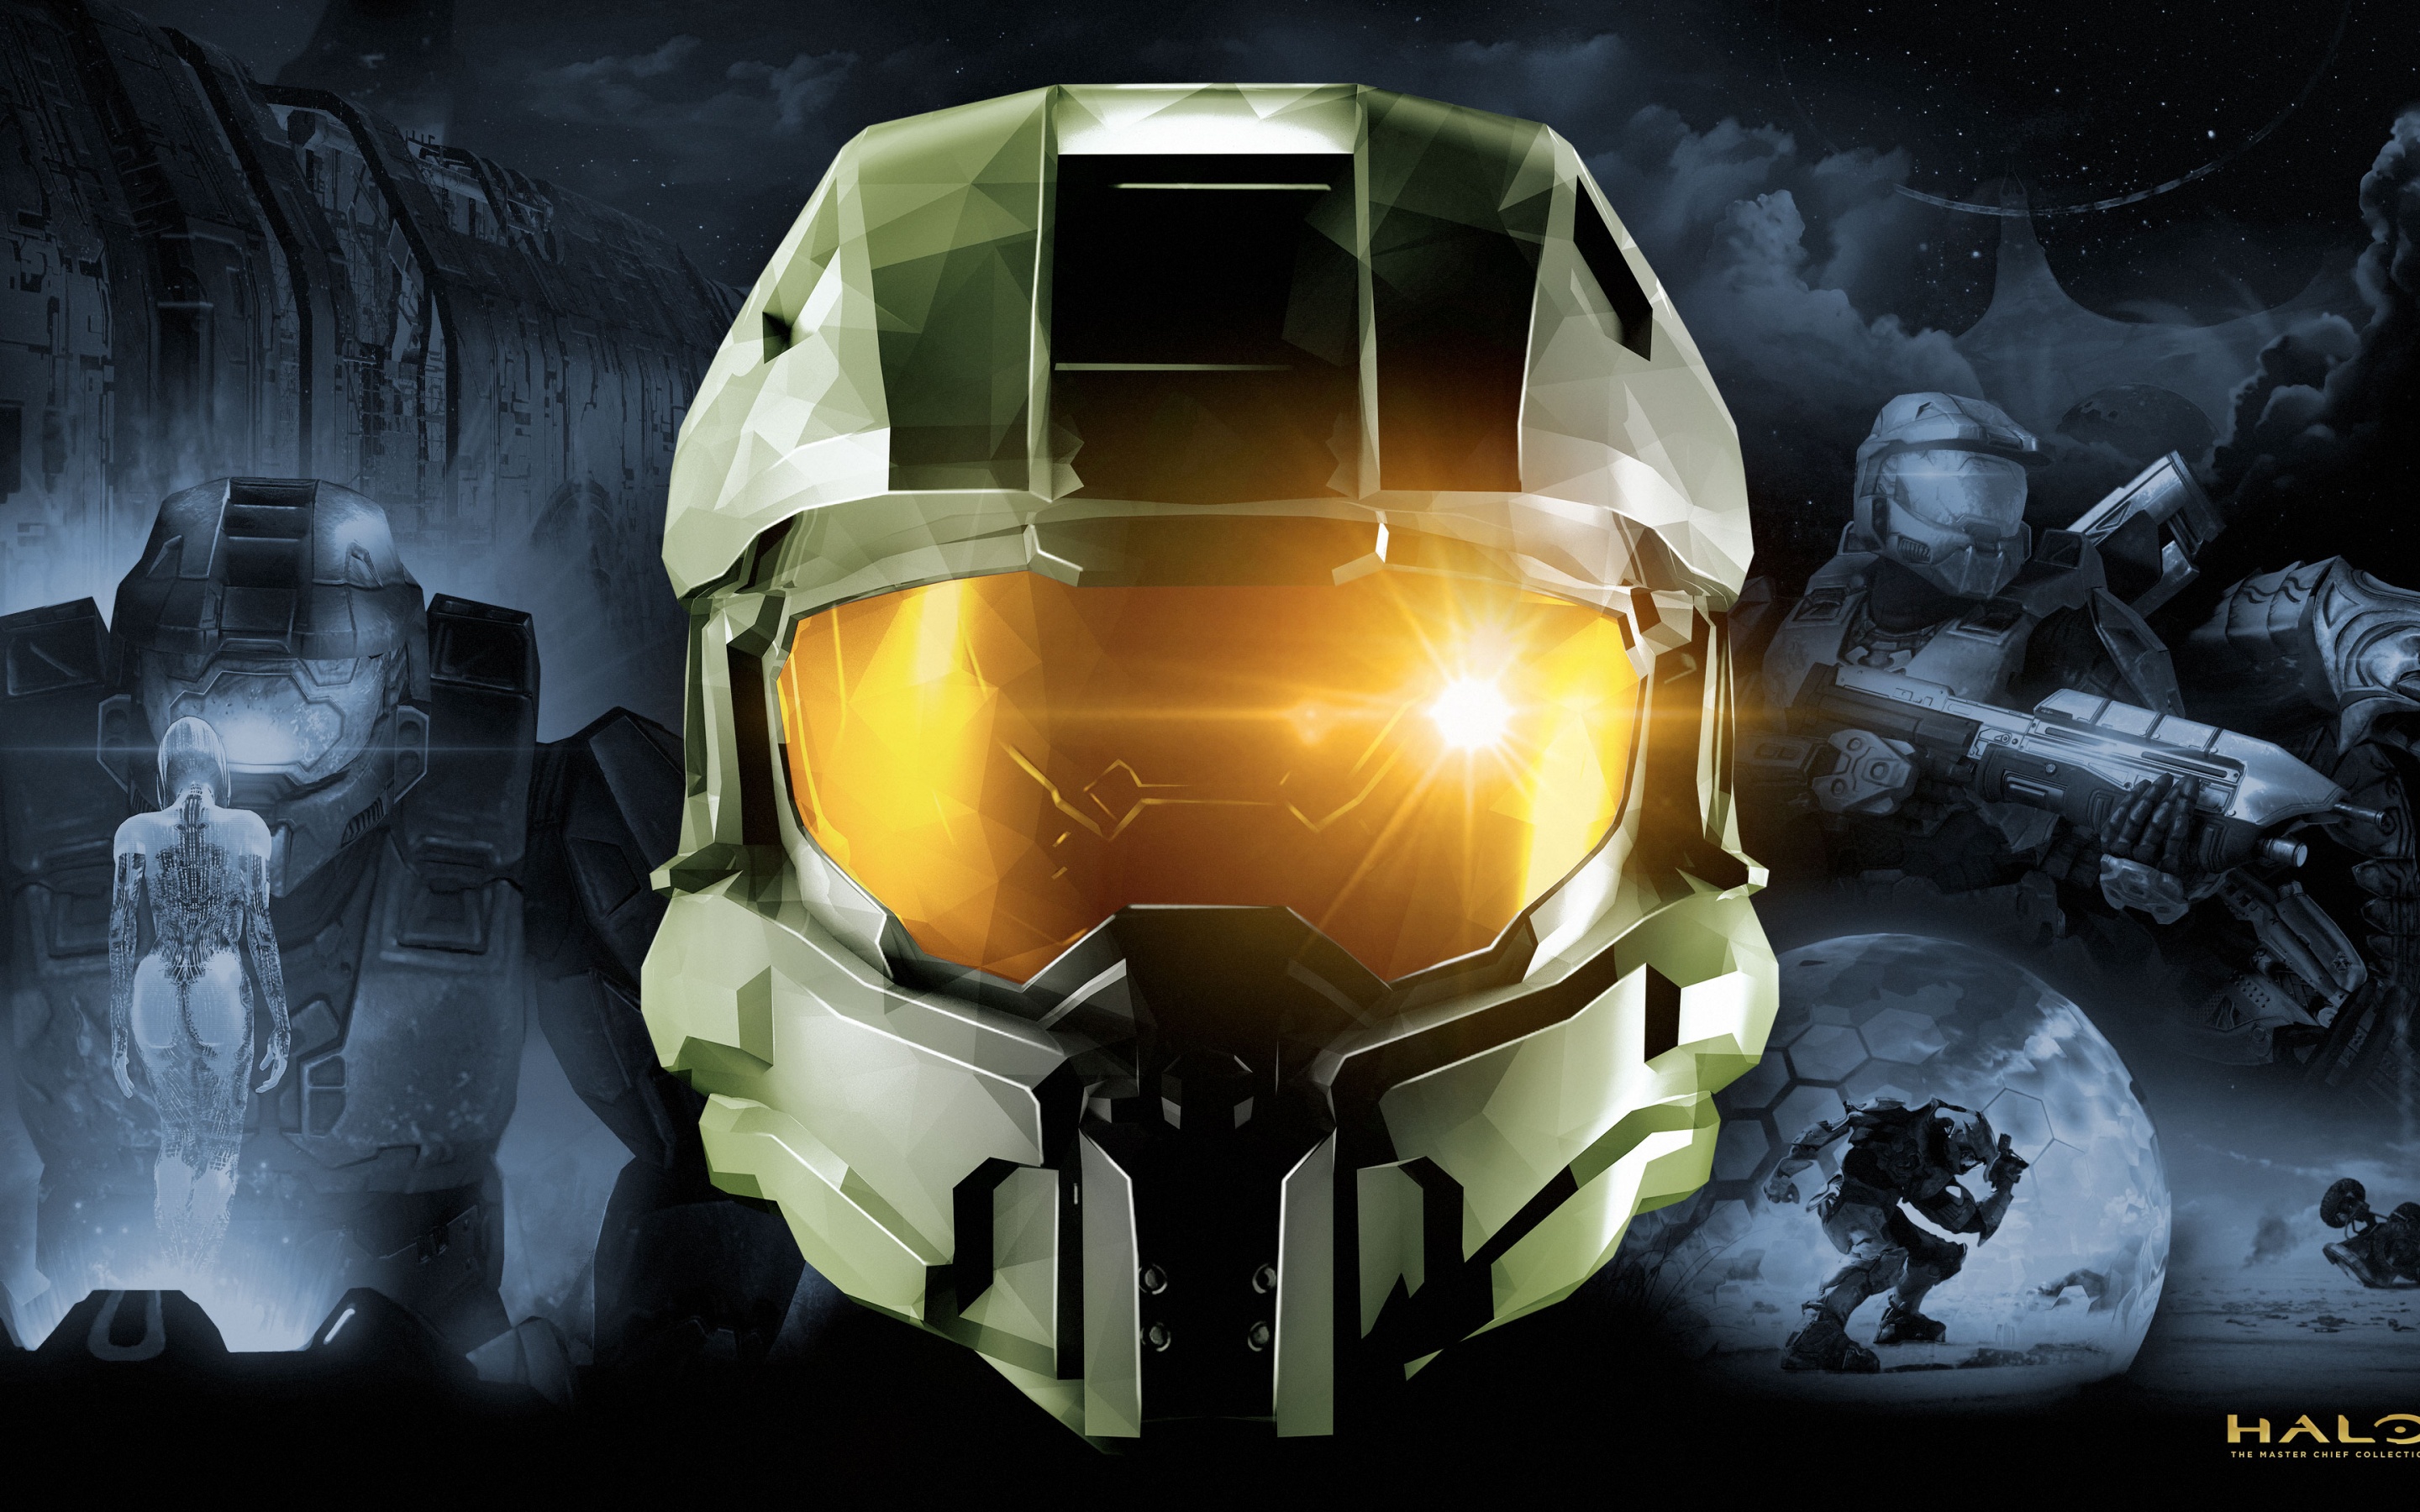 Halo: The Master Chief Collection Wallpaper 4K, Xbox One, PC Games, #1759